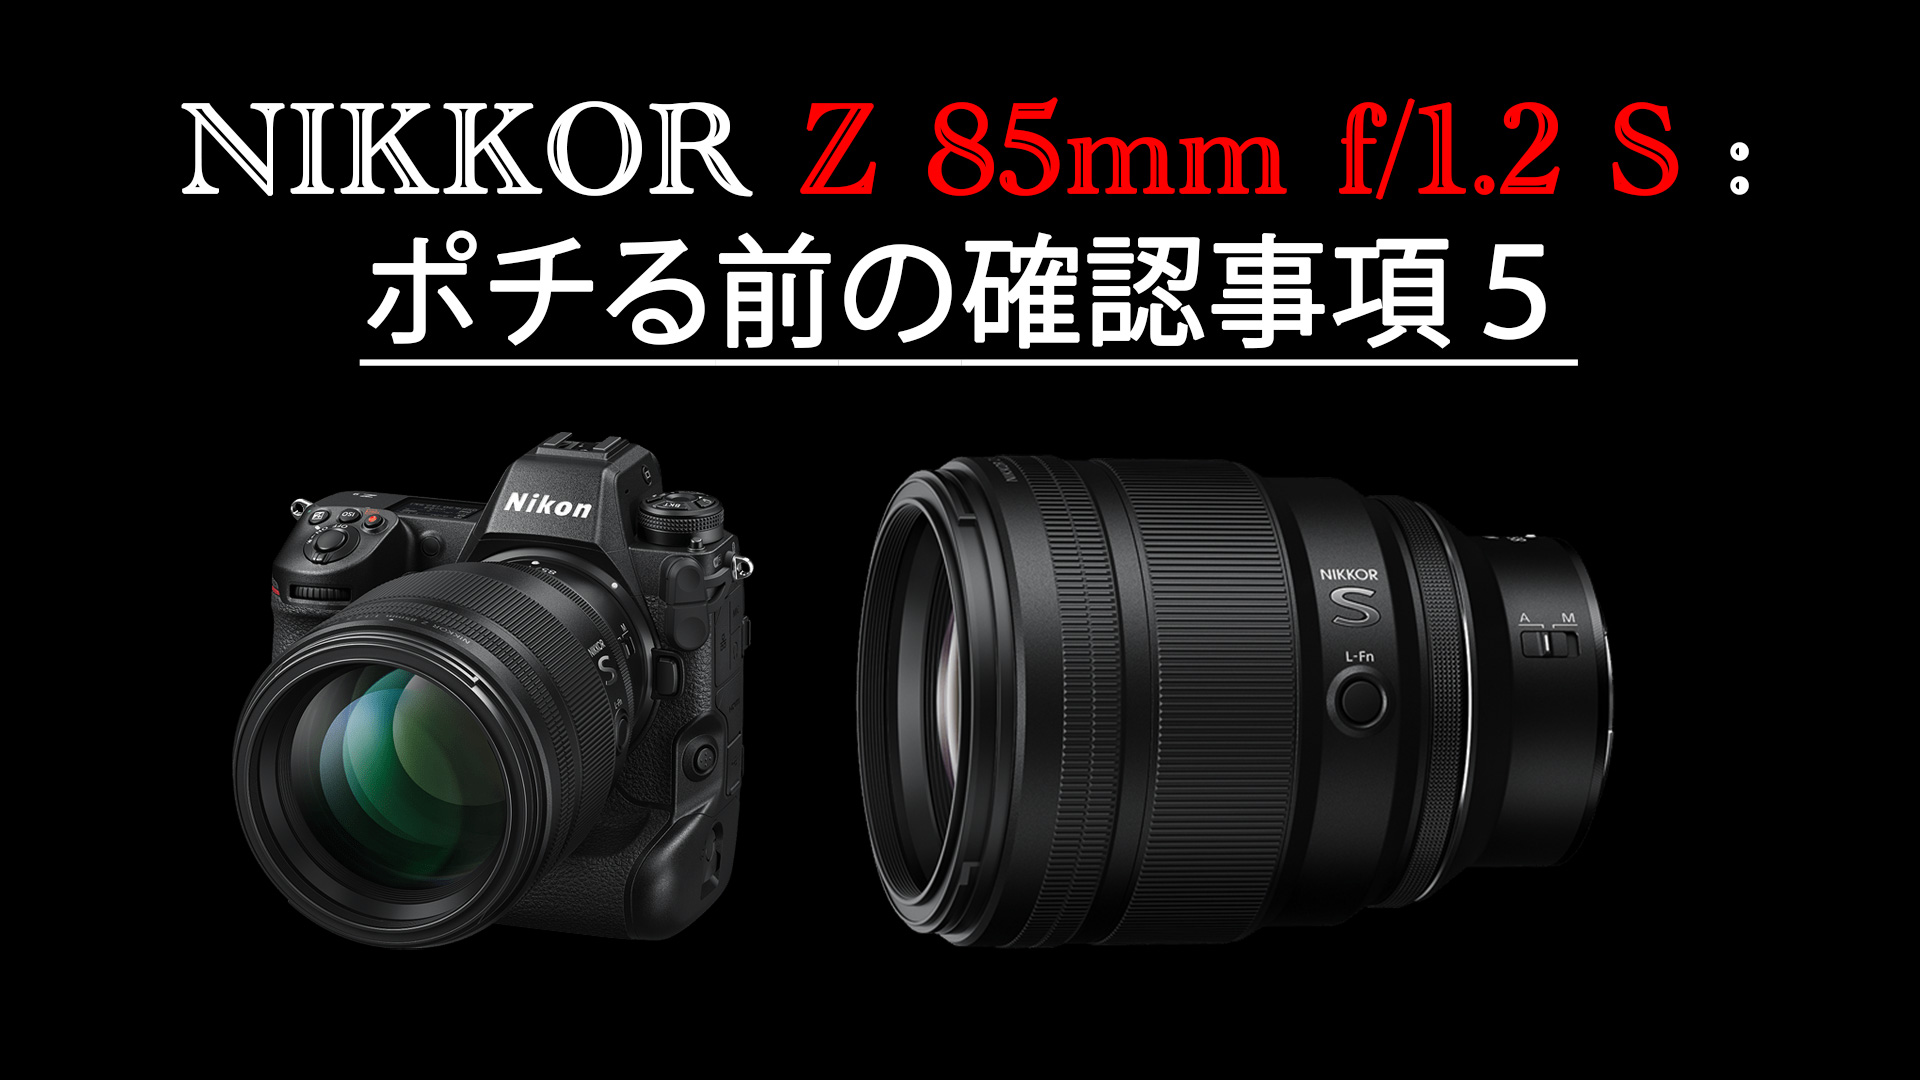 NIKKOR Z 85mm f/1.2 S プレビュー:ポチる前の確認事項５ | ヨシピク